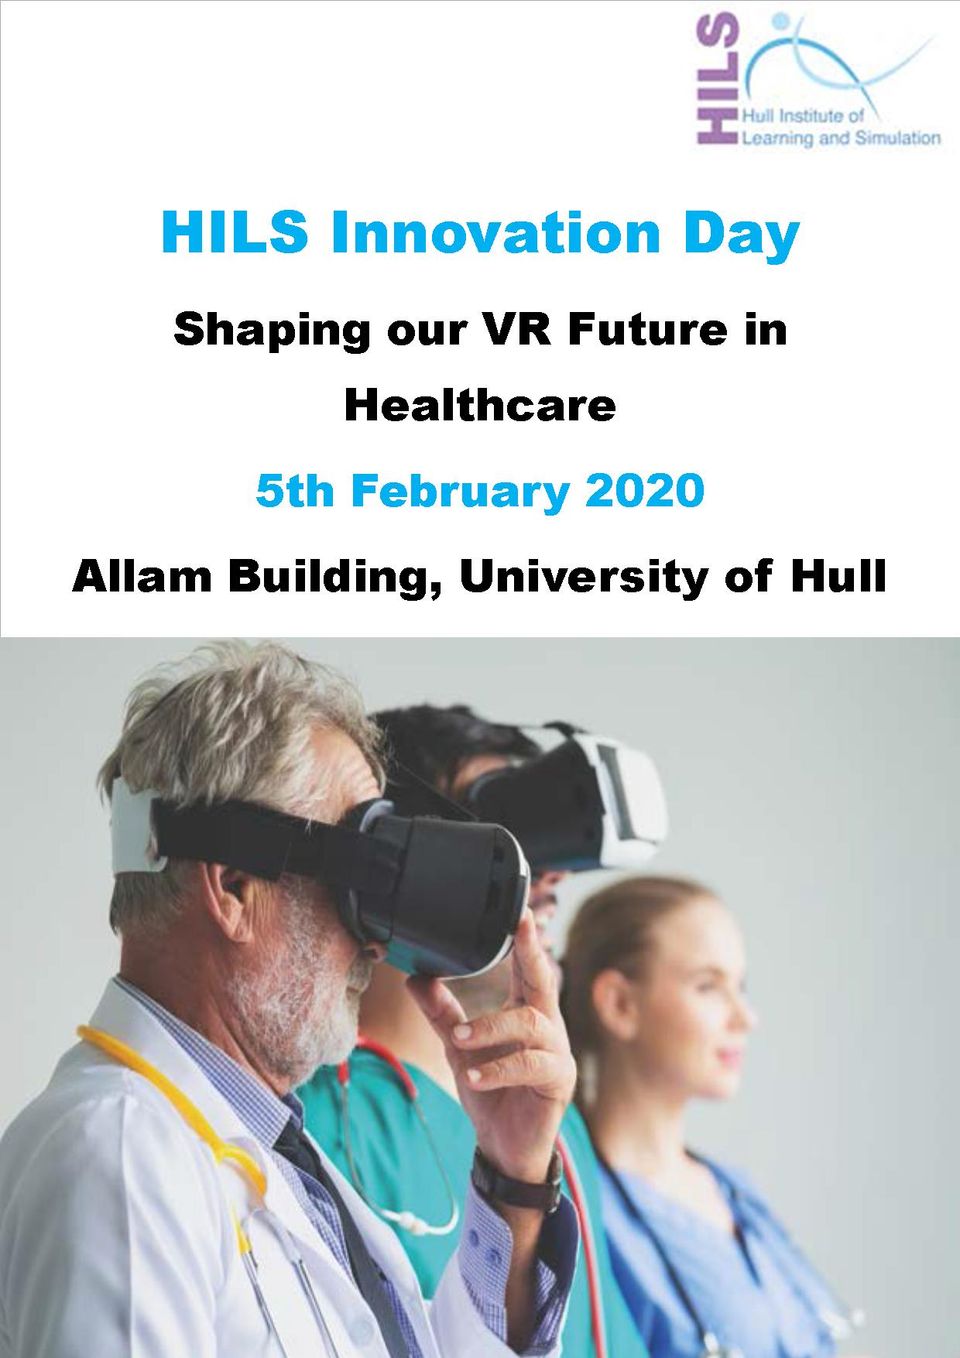 poster containing details about the HILS Innovation Day